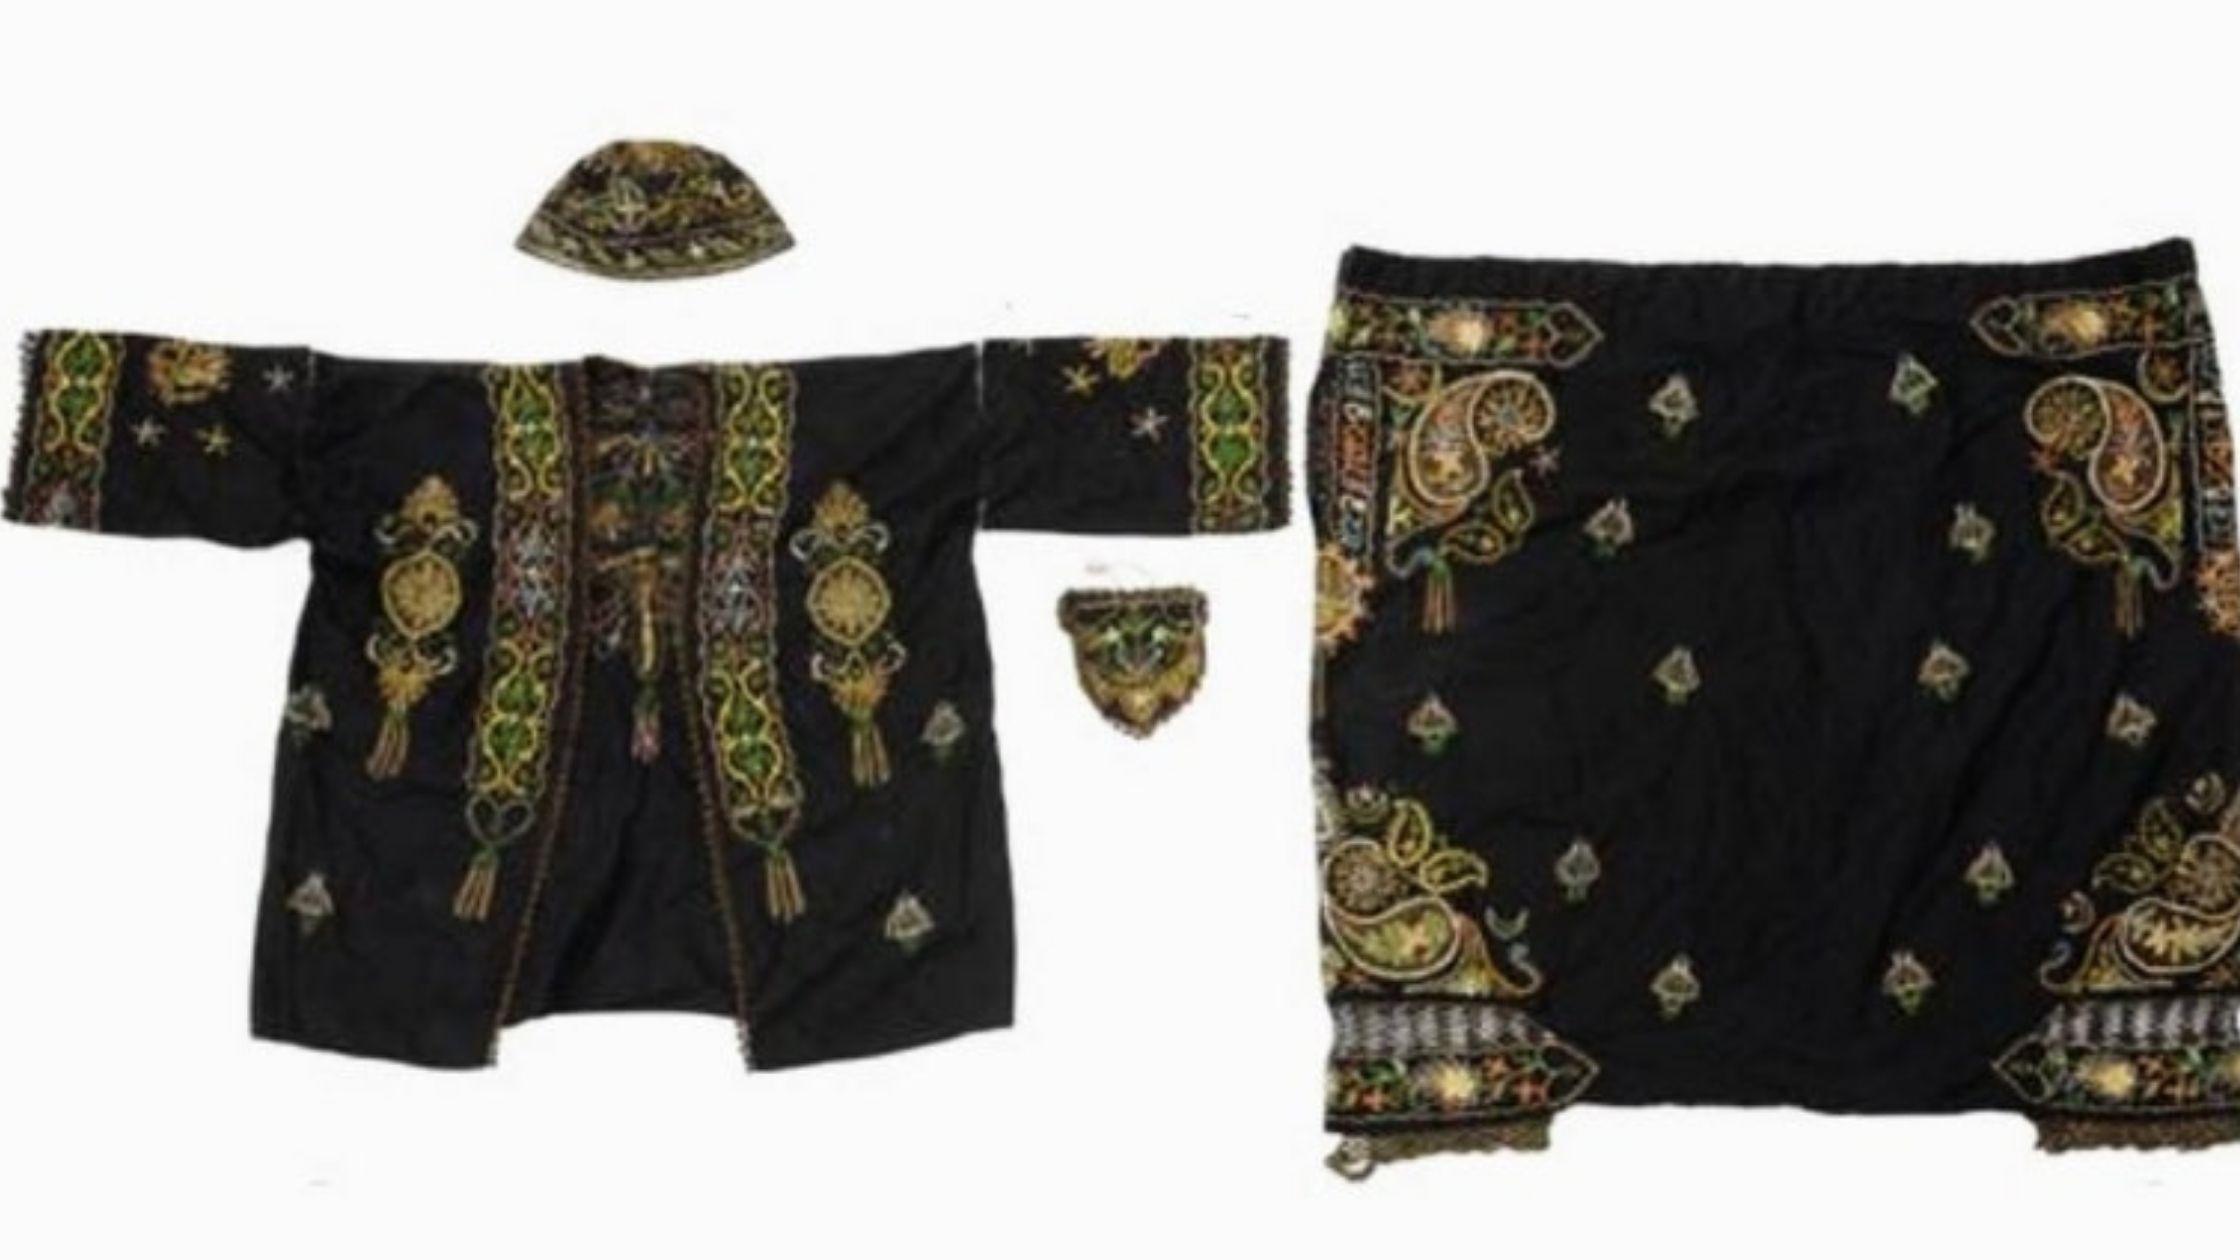 An incredible piece here and a rare find, this is a South East Asian ensemble from the early 20th century.

Traditional dress from the South East of Asia most likely Philippines, possibly Bagobo.

This fantastic set comprises an open fronted jacket,